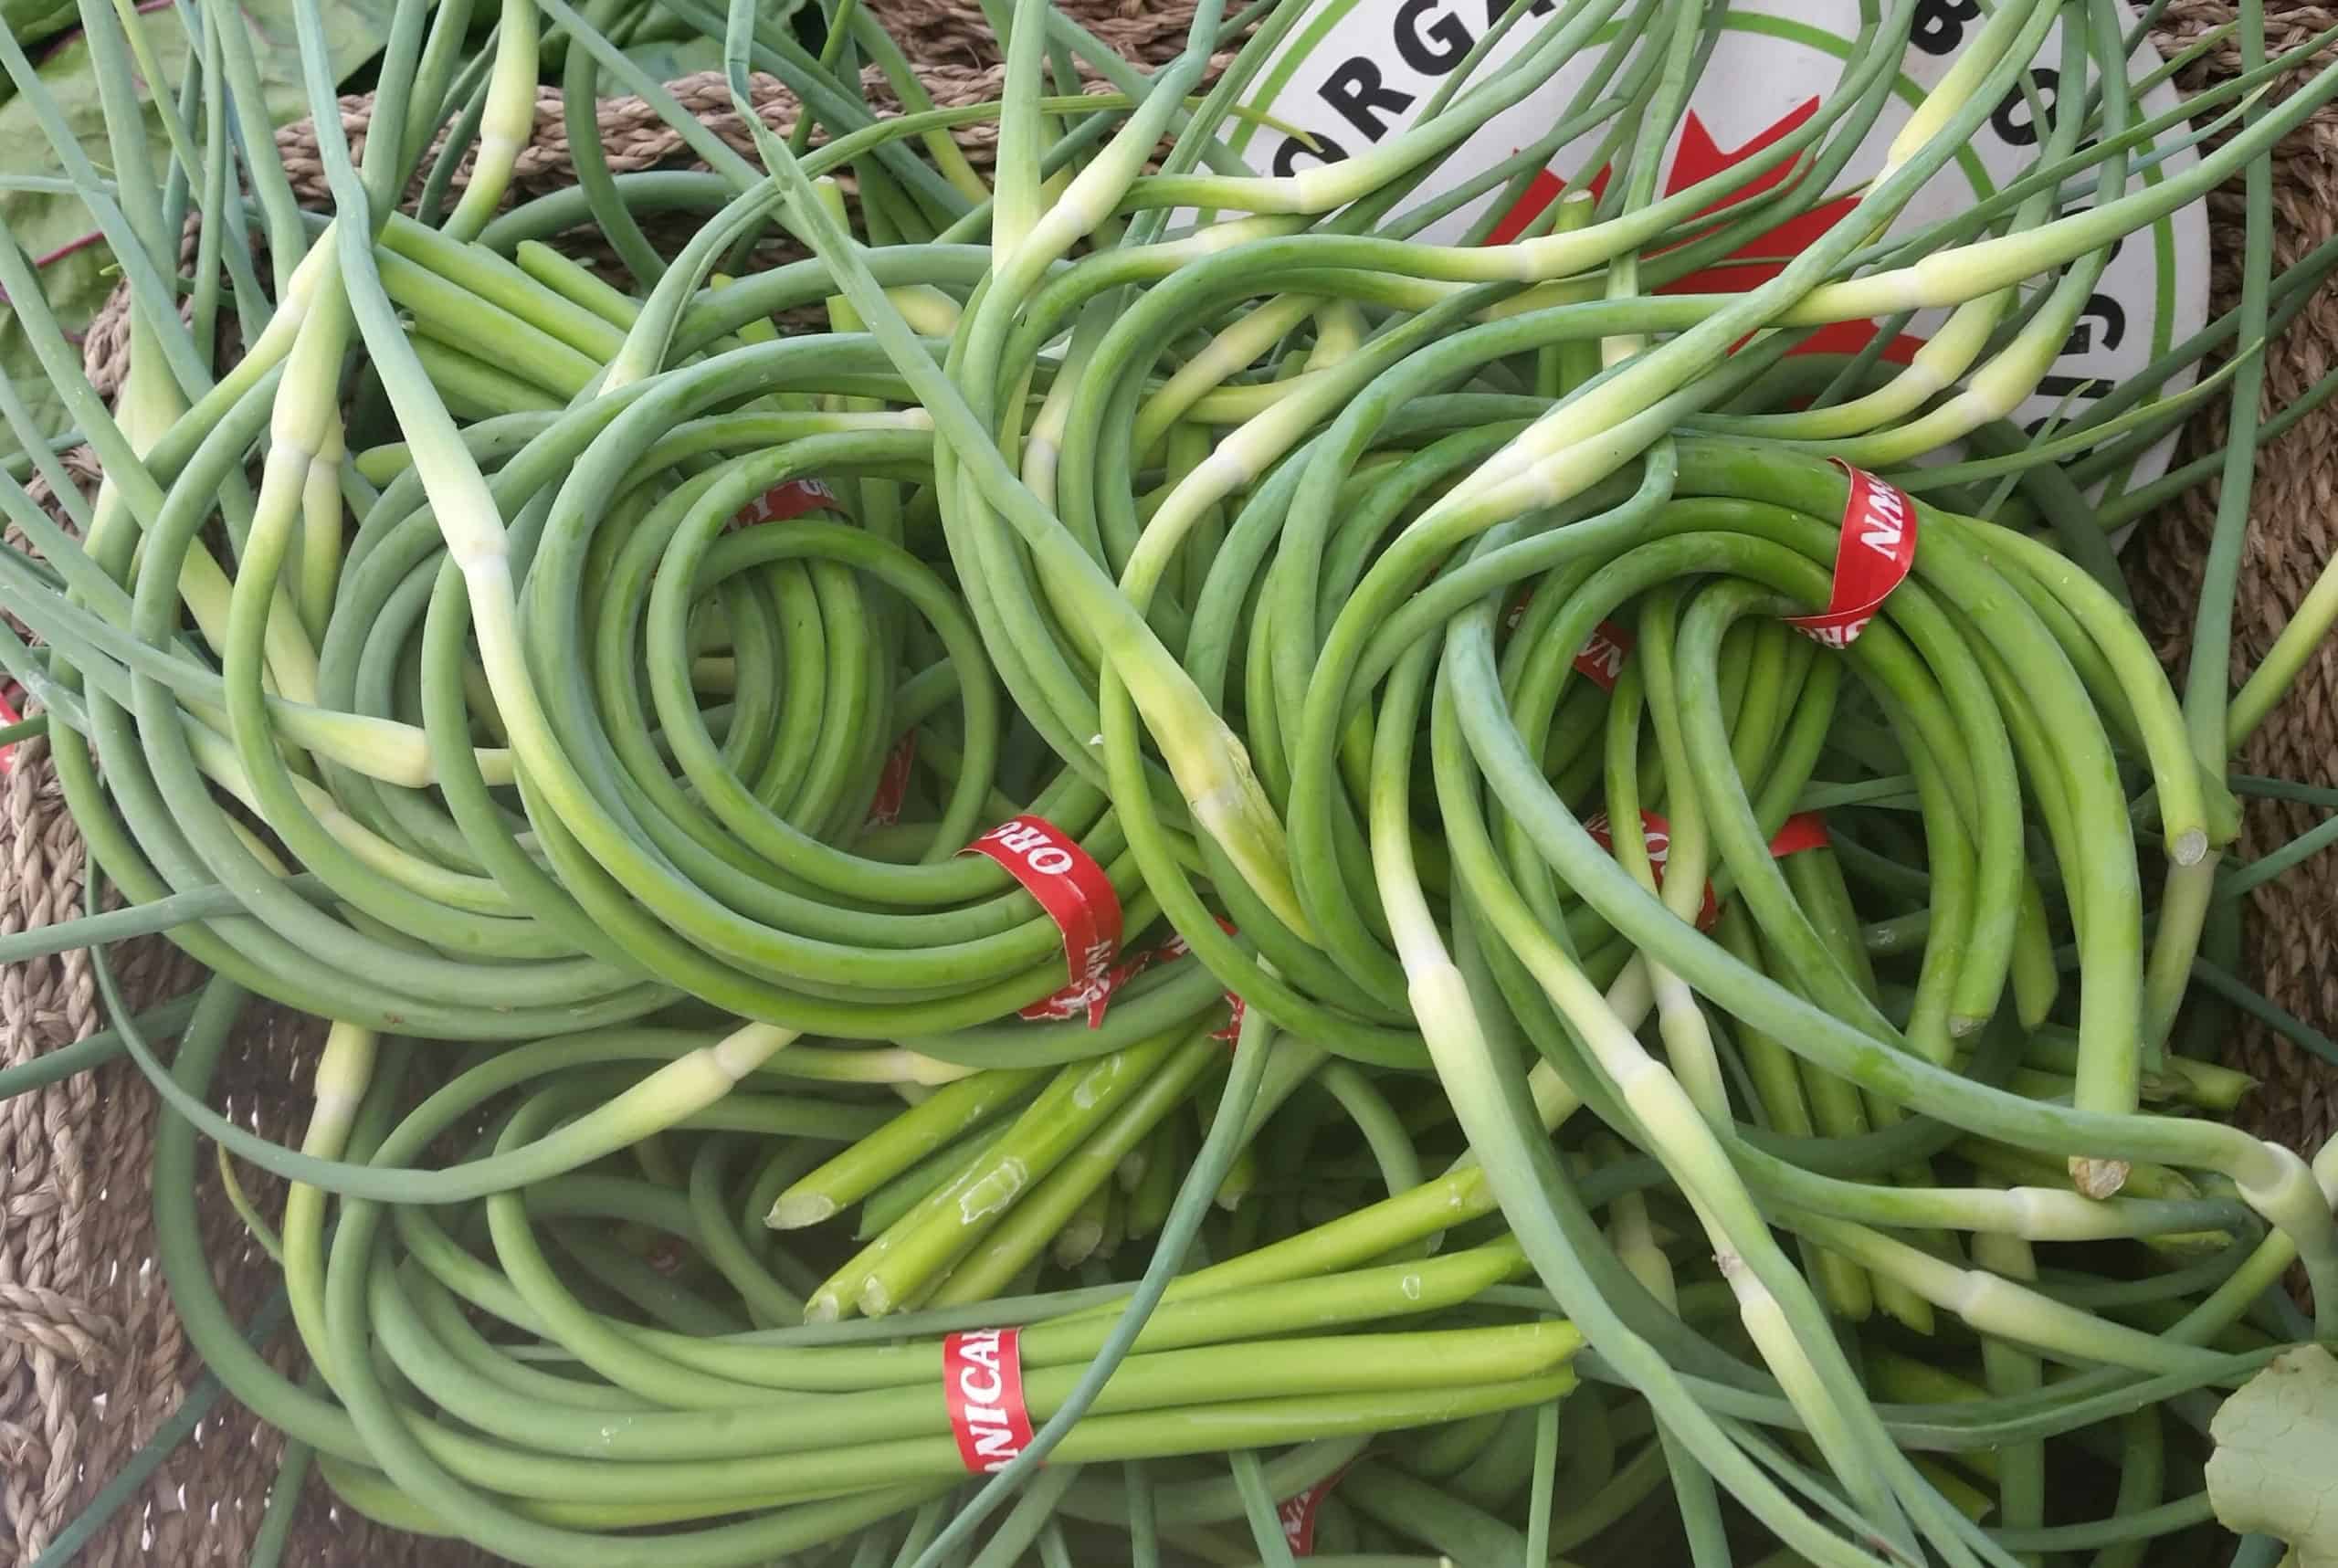 Garlic scapes bundles together and in a pile